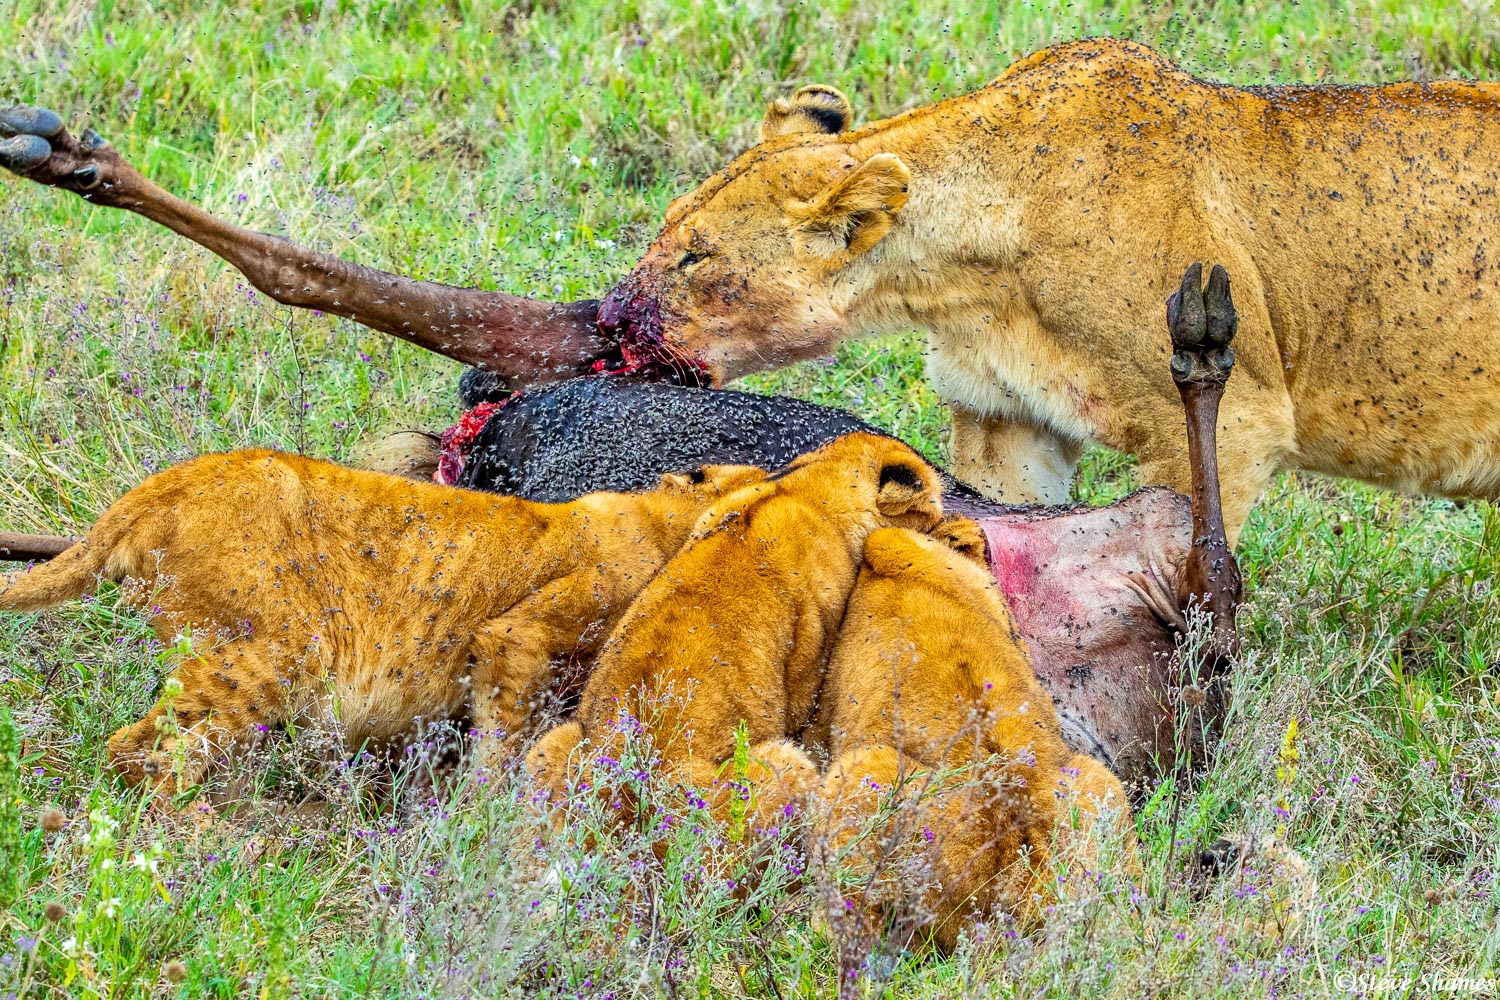 These must have been very hungry lions to be eating this fly covered wildebeest carcass. Look at those cubs digging in!